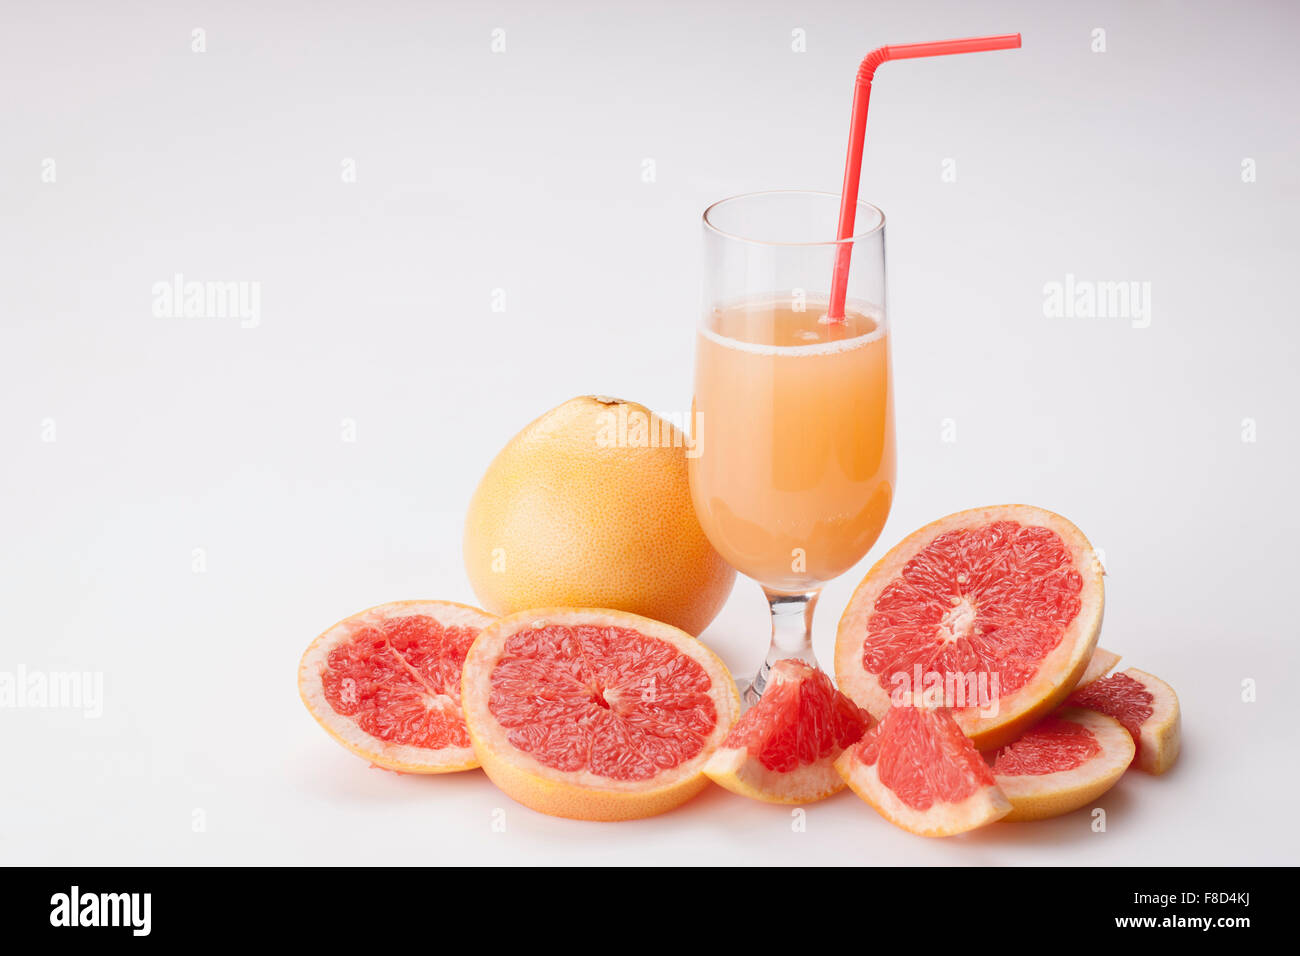 Glass of grapefruit juice with a straw in it in the middle of slices of grapefruits and a whole fresh grapefruit Stock Photo